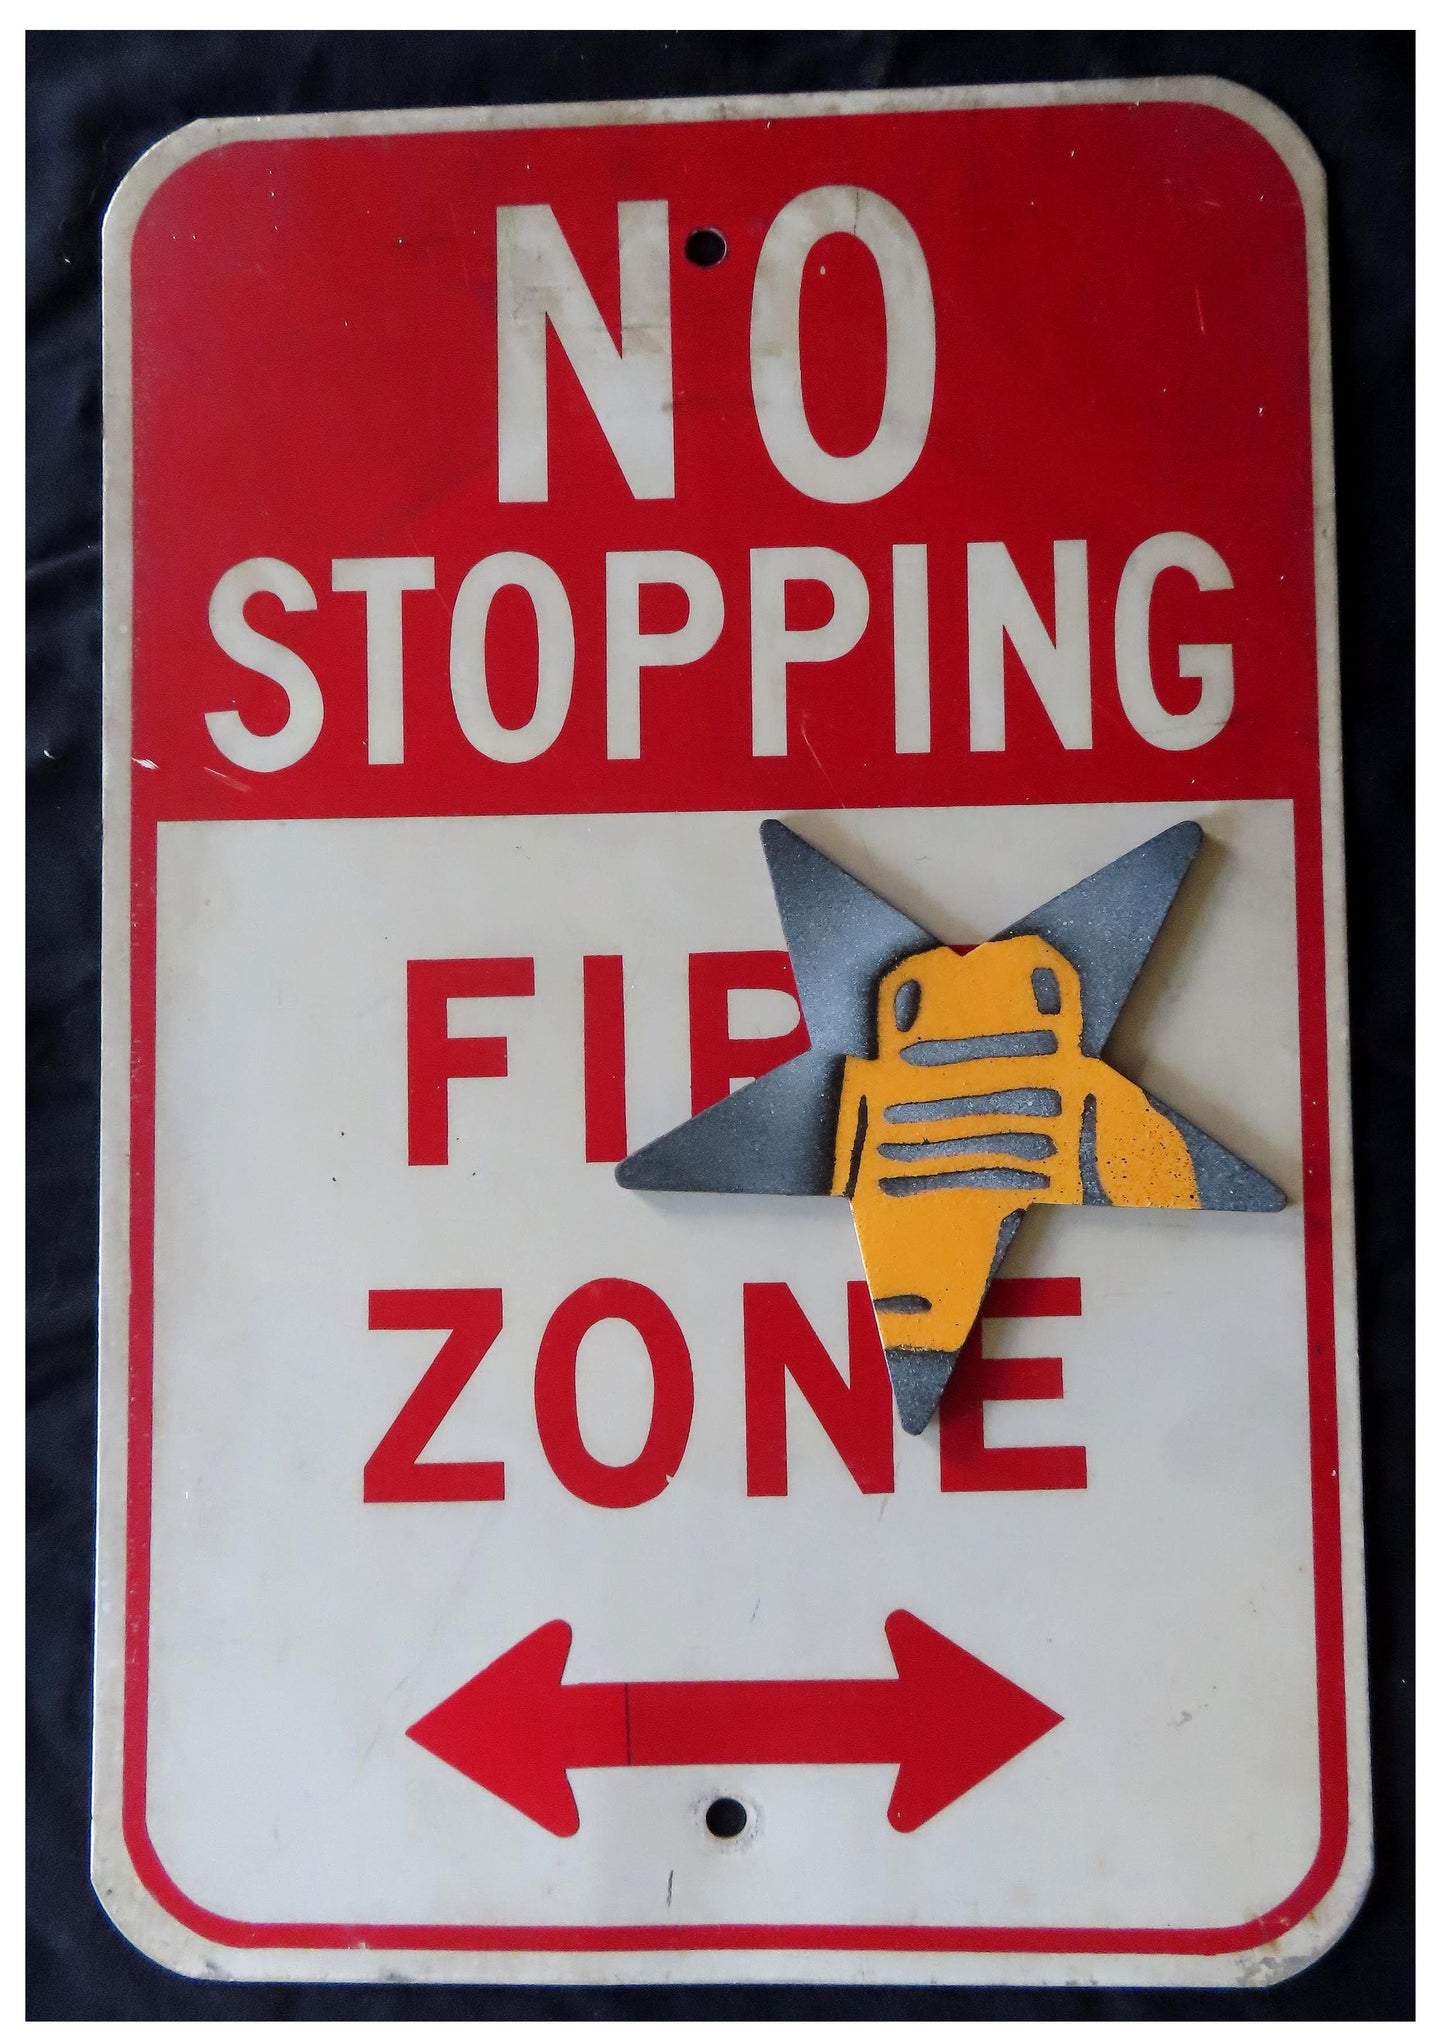 No Stopping - Fire Zone